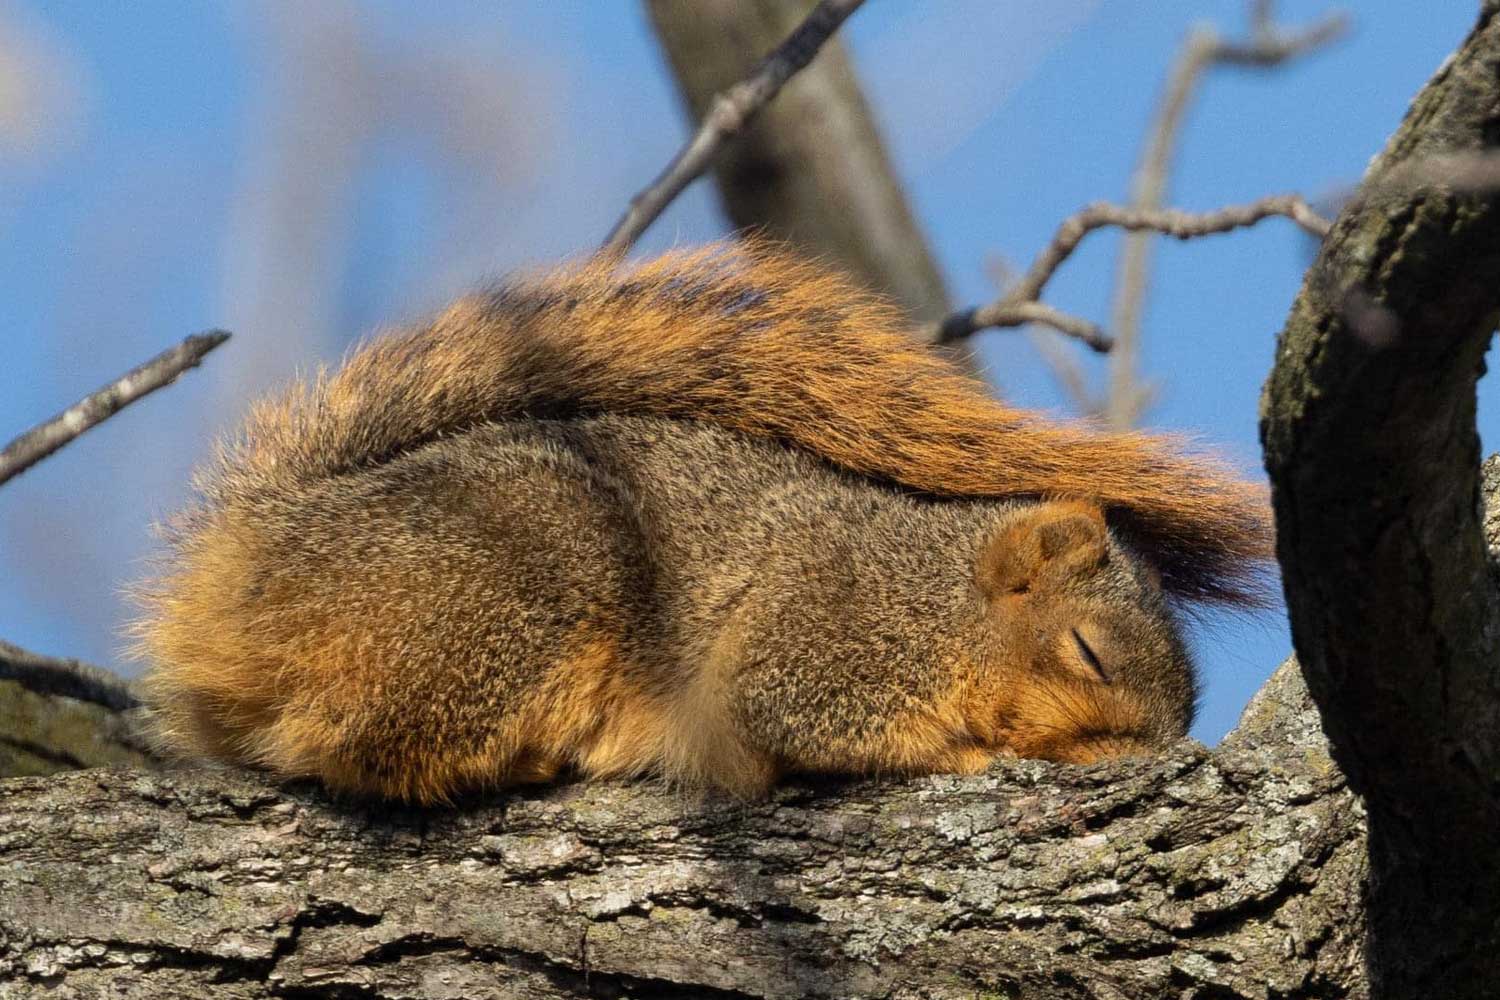 A red squirrel sleeping in the sun while laying on a branch.